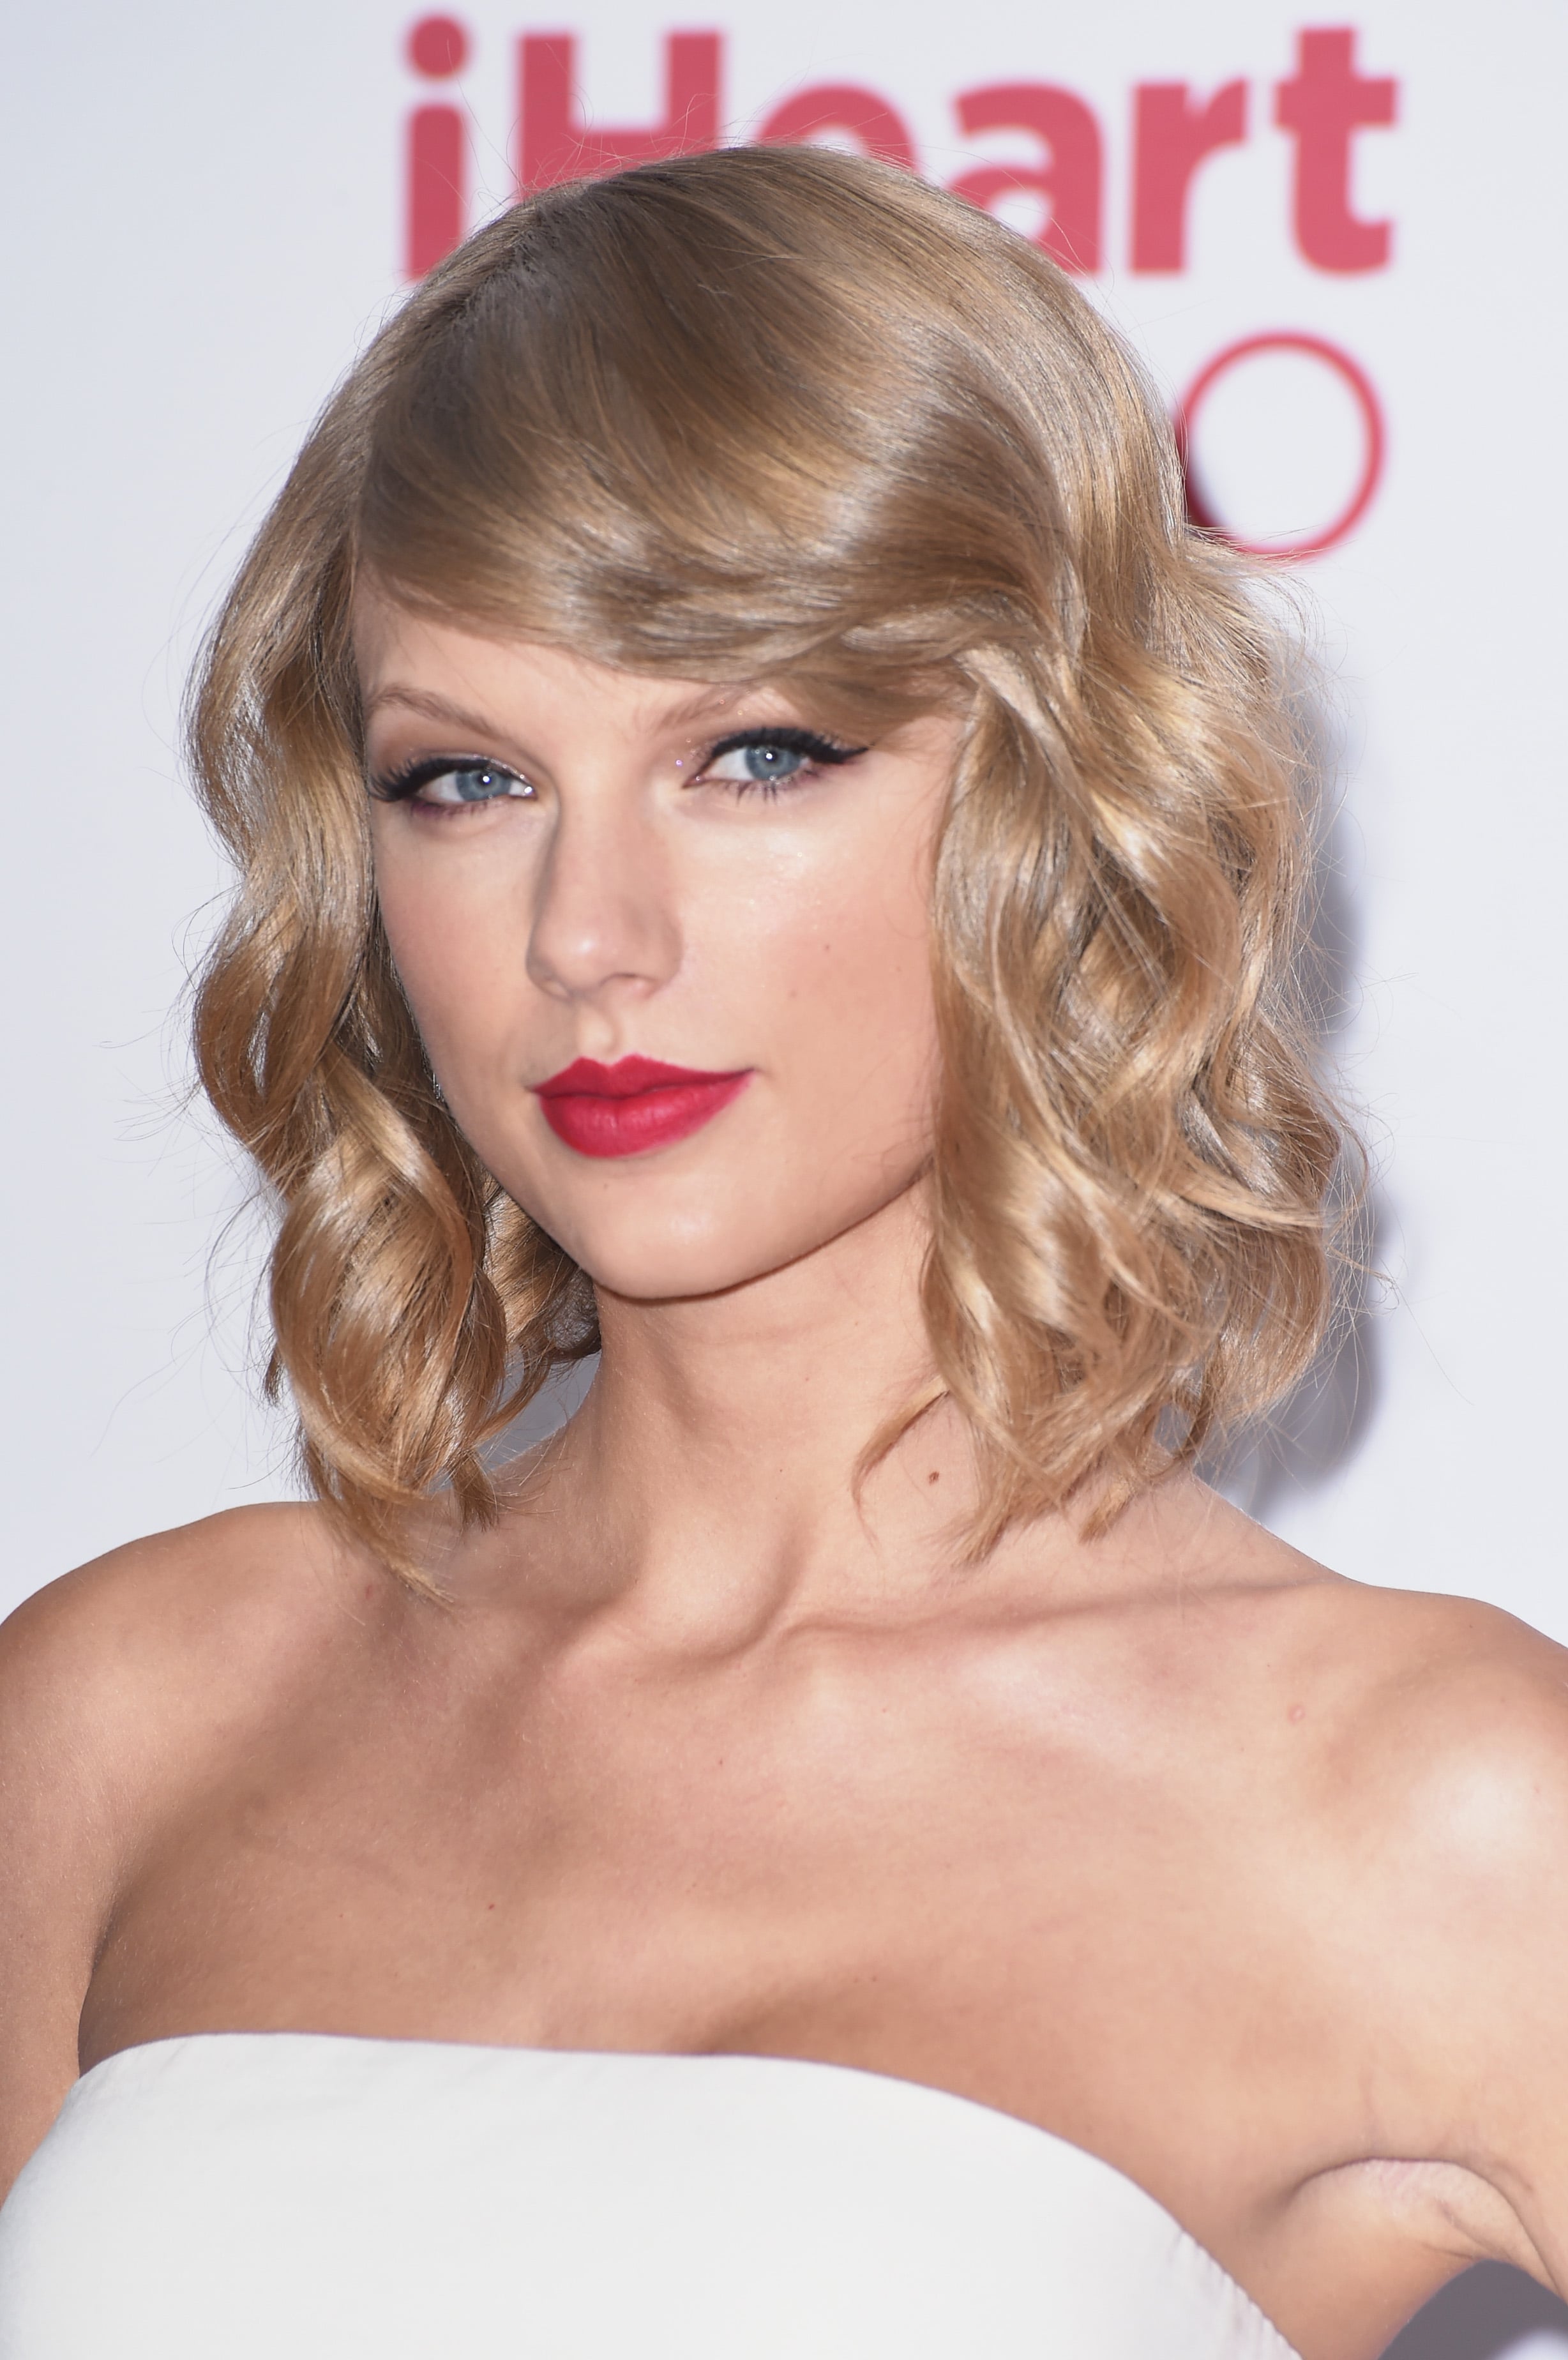 40 Taylor Swift Hairstyles And Haircuts - Celebrities